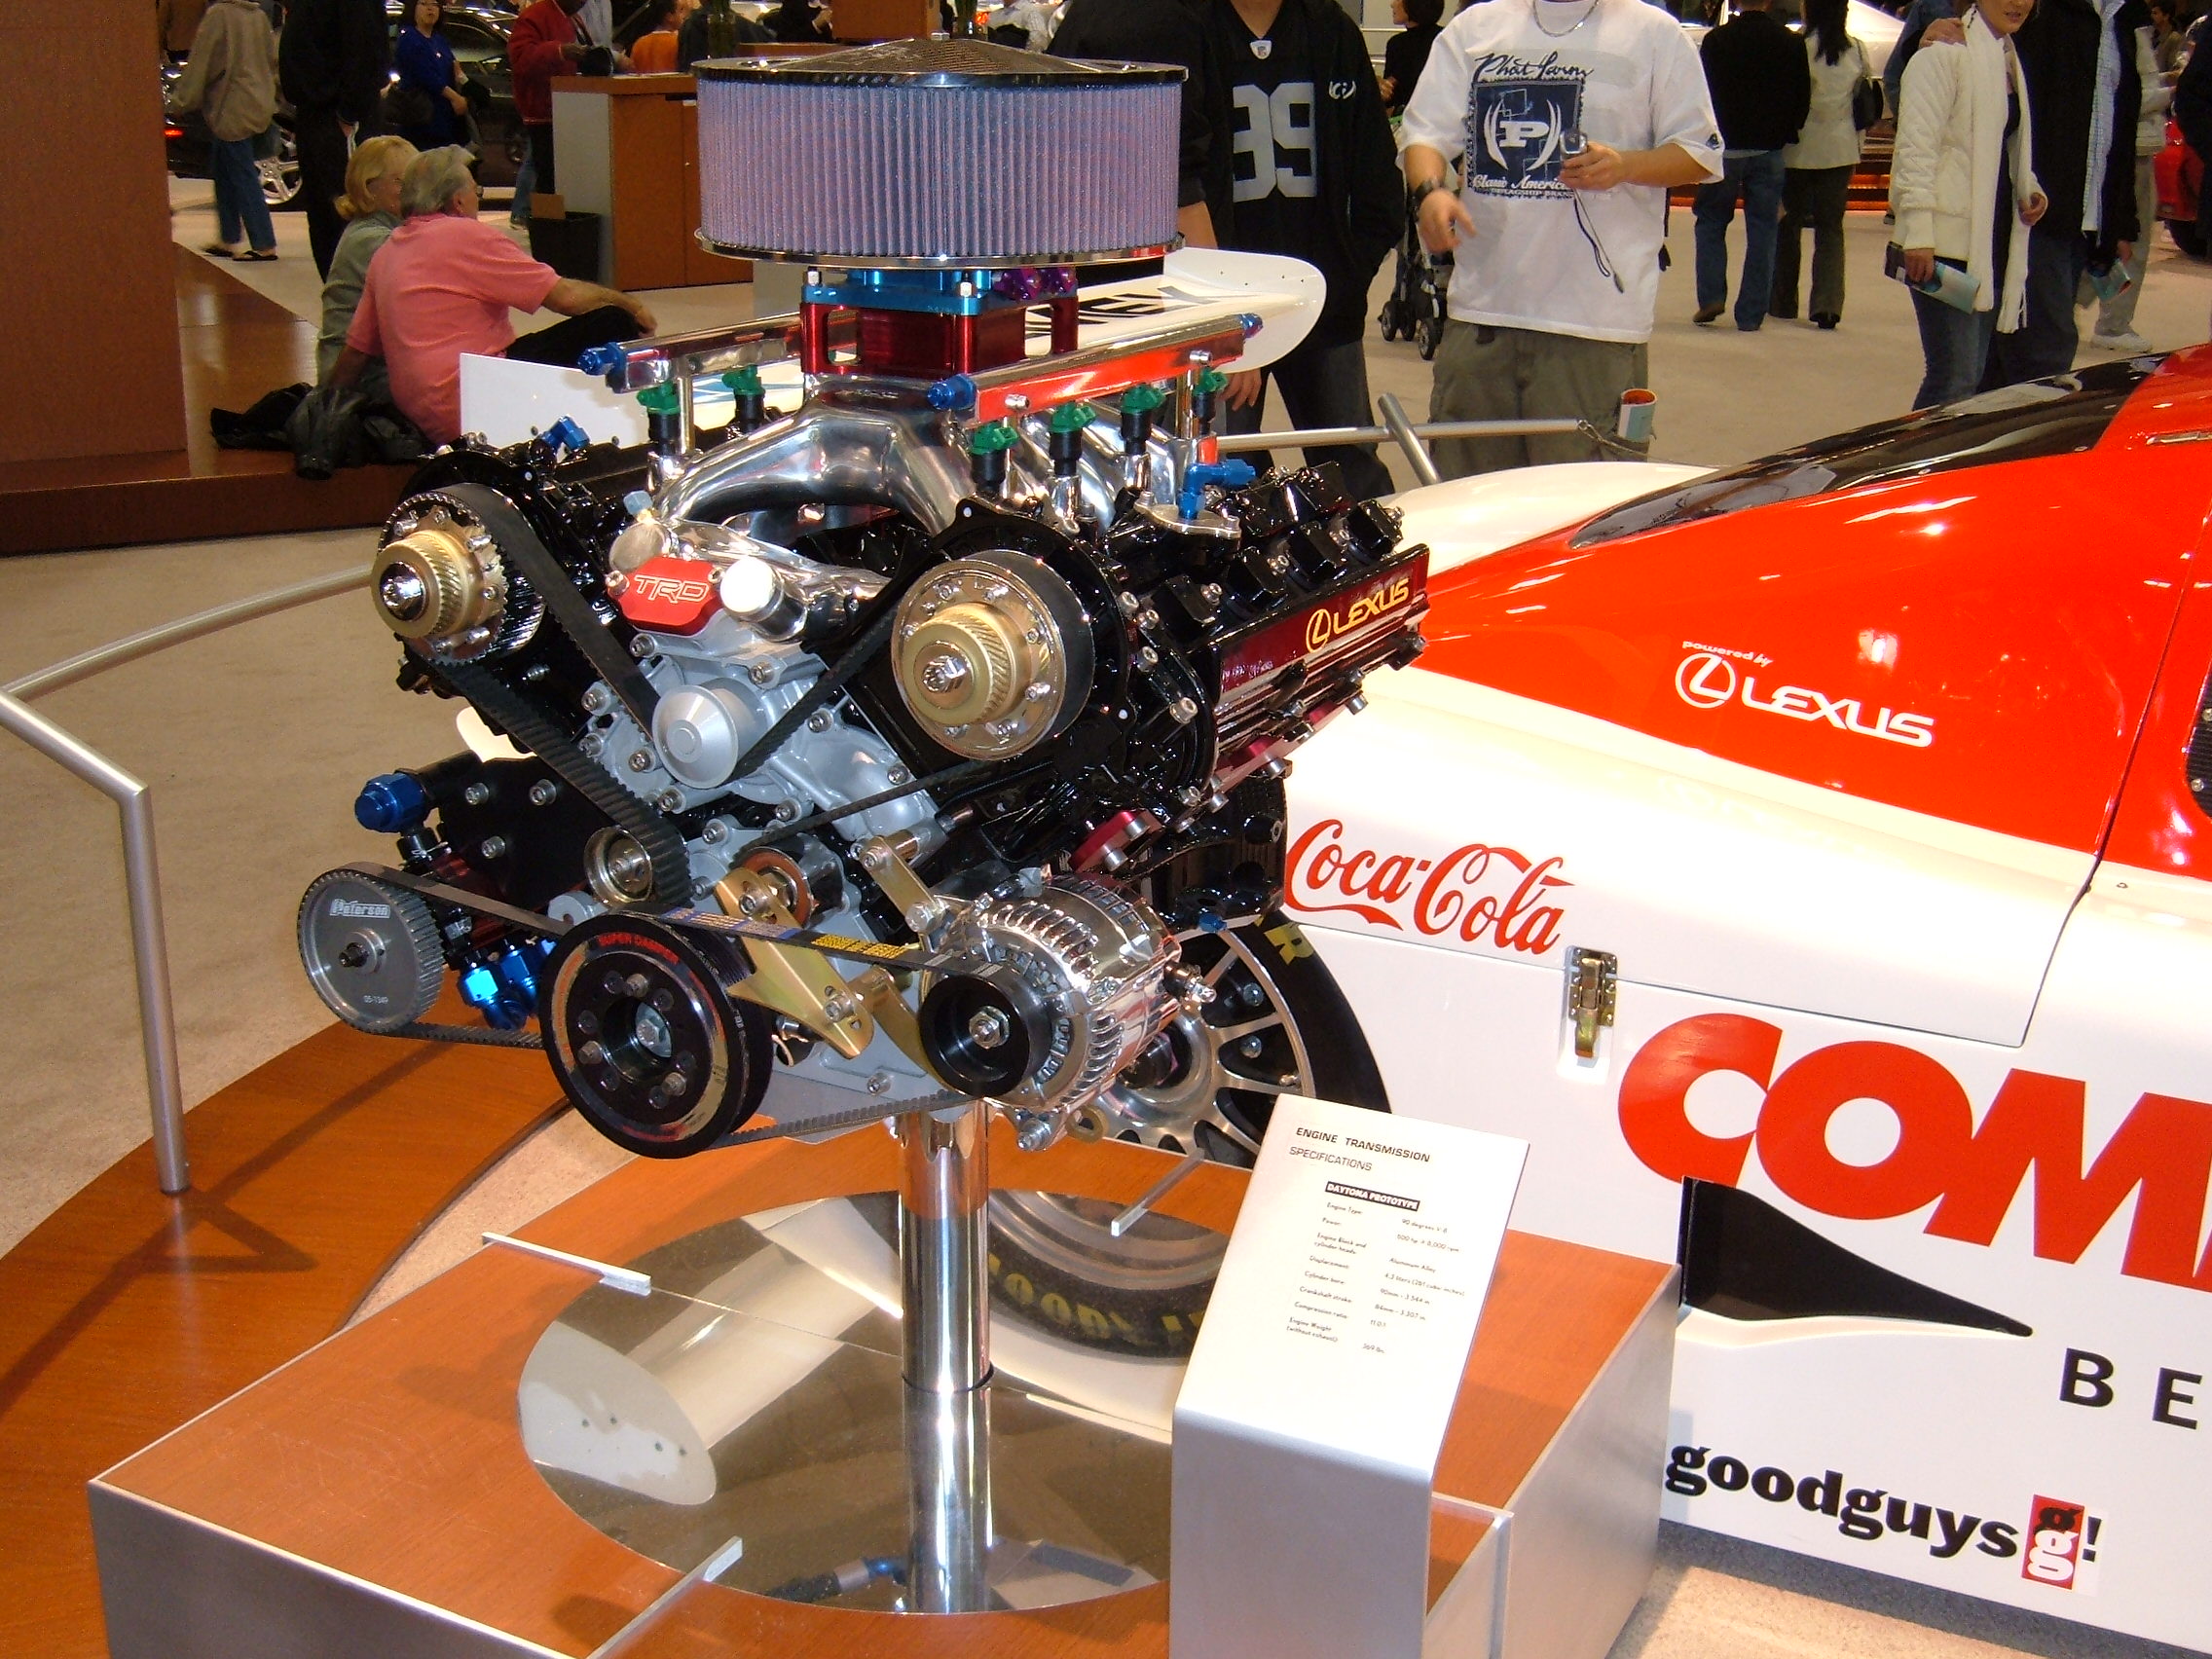 what engine do toyota use in nascar #6